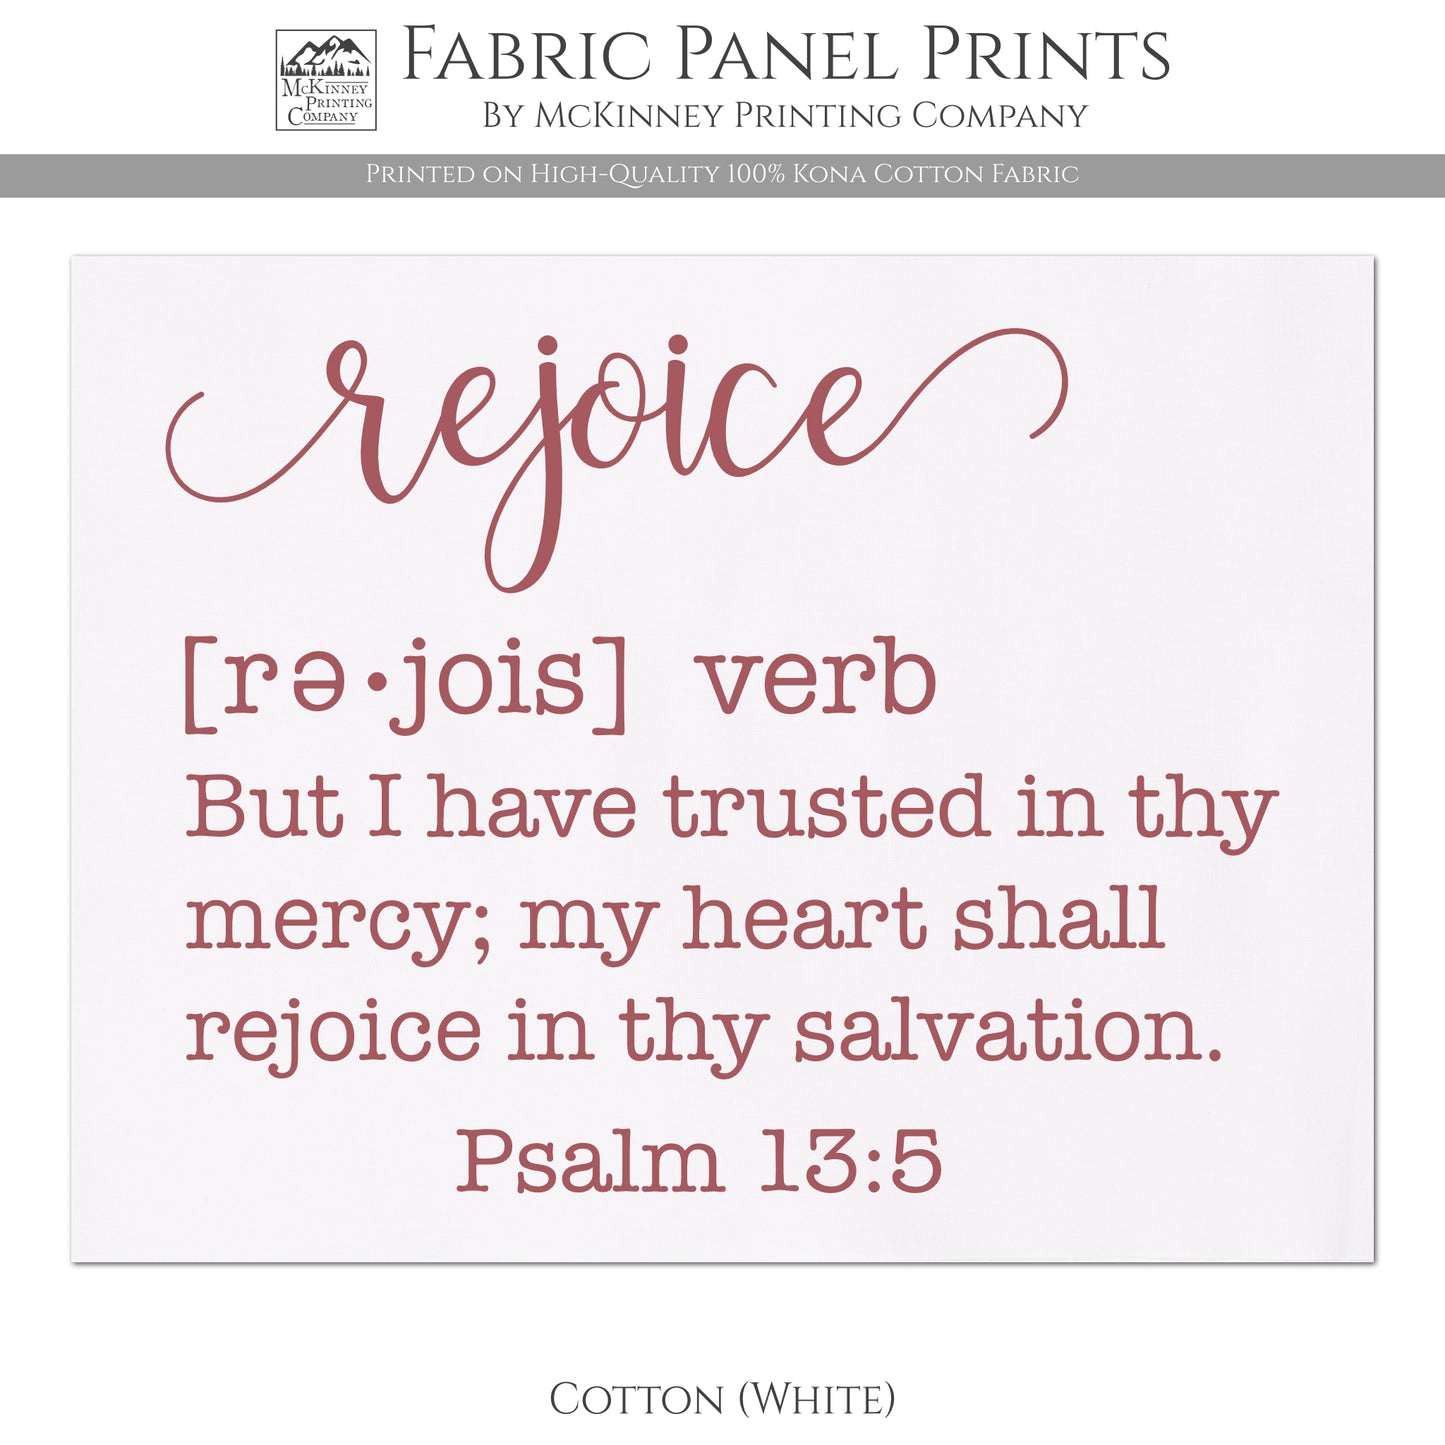 Rejoice - Christian Fabric - But I have trusted in thy mercy; my heart shall rejoice in thy salvation - Psalm 13:5 - Cotton, White